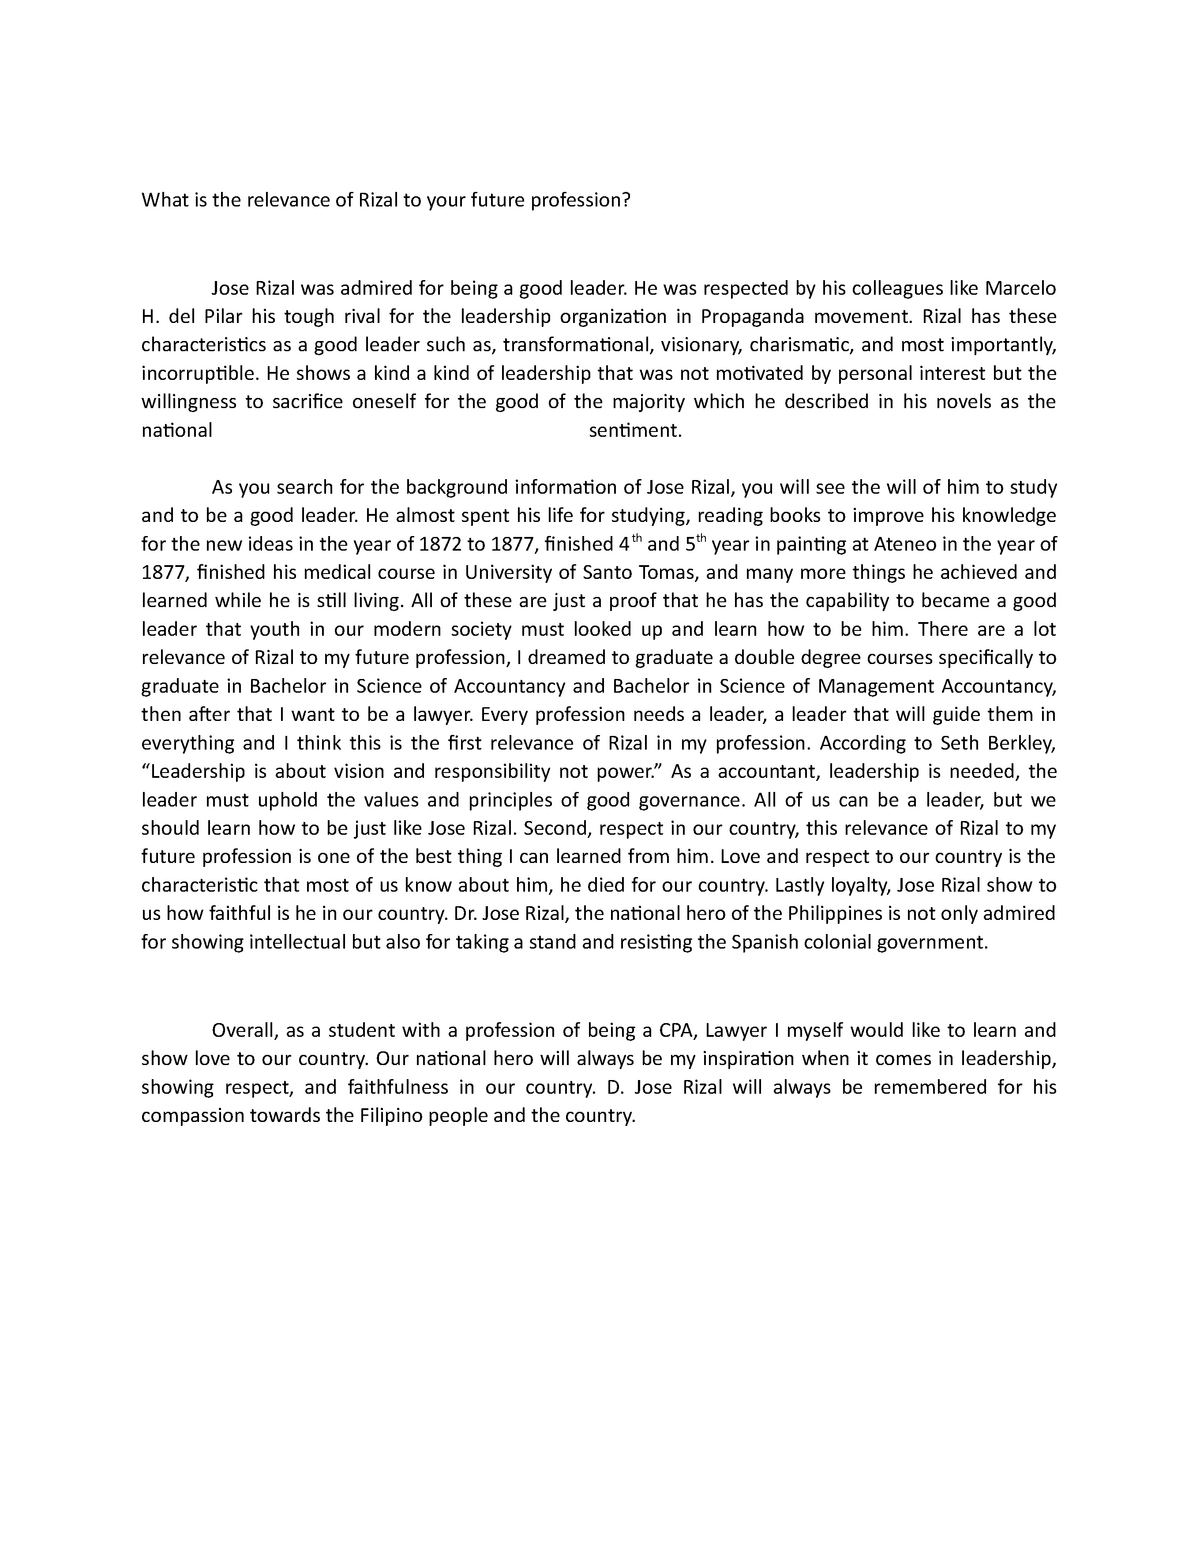 personal essay about relevance of the rizal course